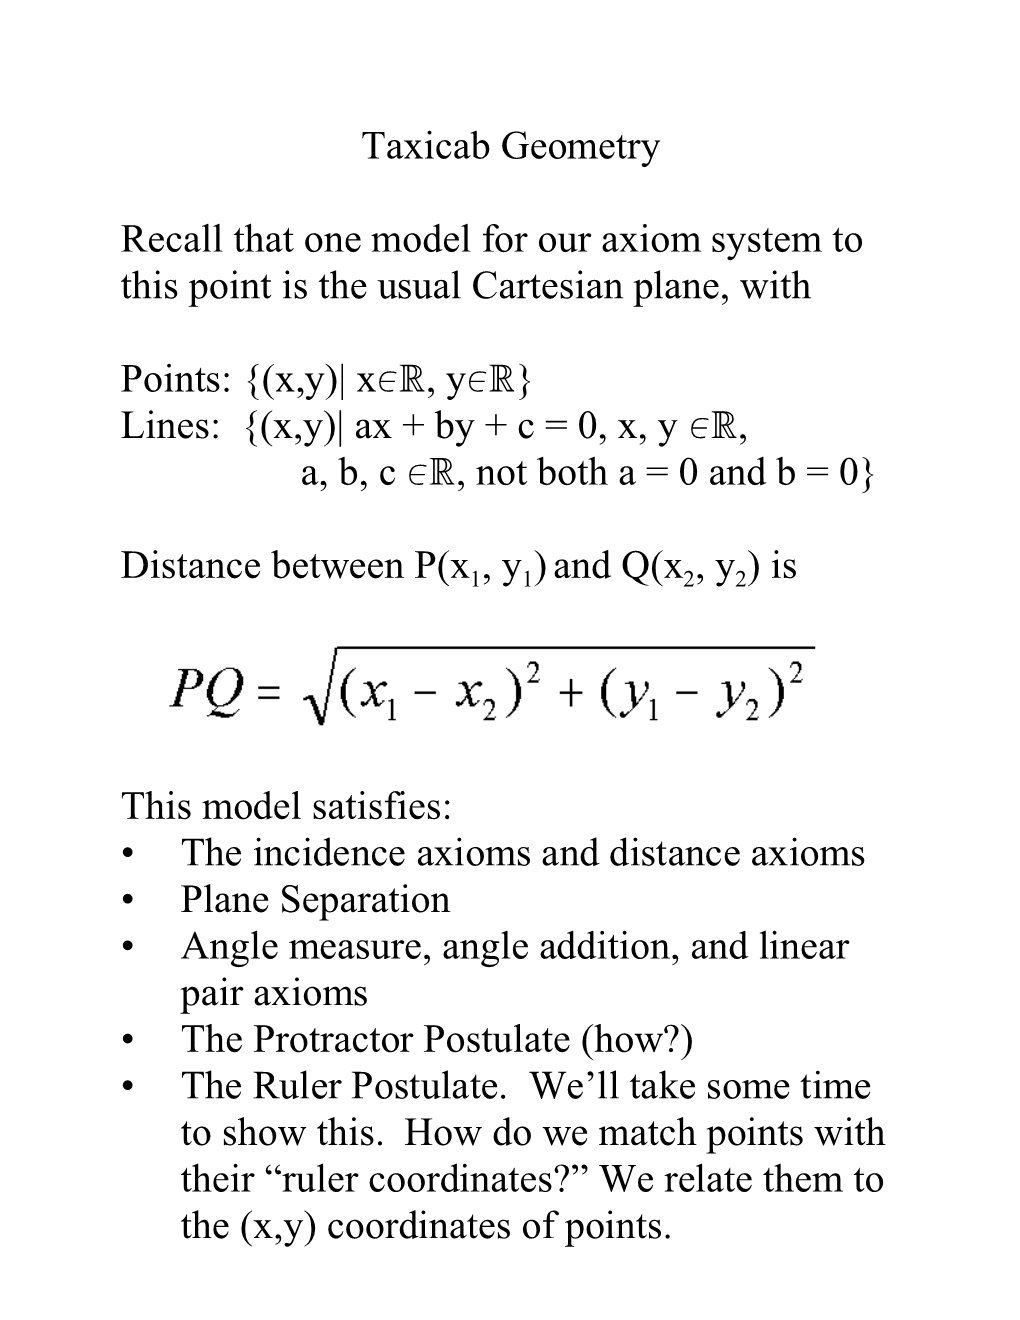 Taxicab Geometry Recall That One Model for Our Axiom System to This